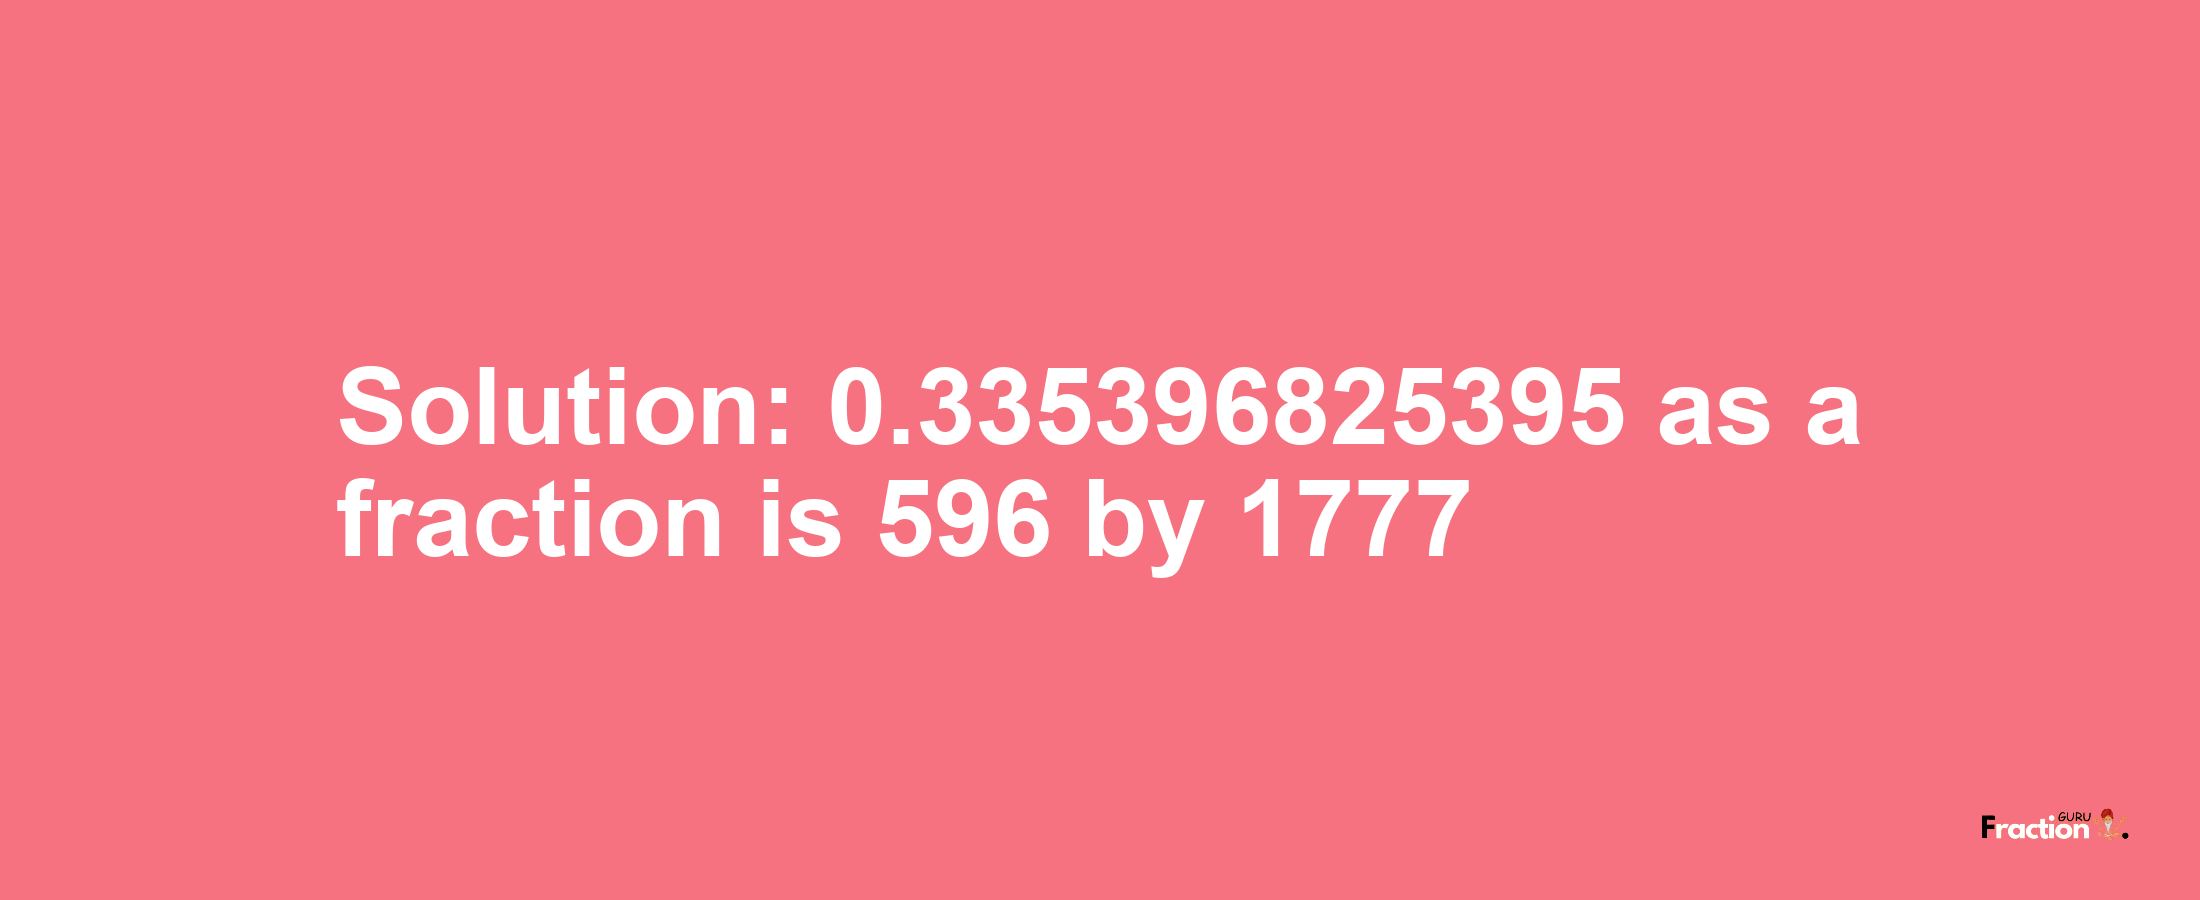 Solution:0.335396825395 as a fraction is 596/1777